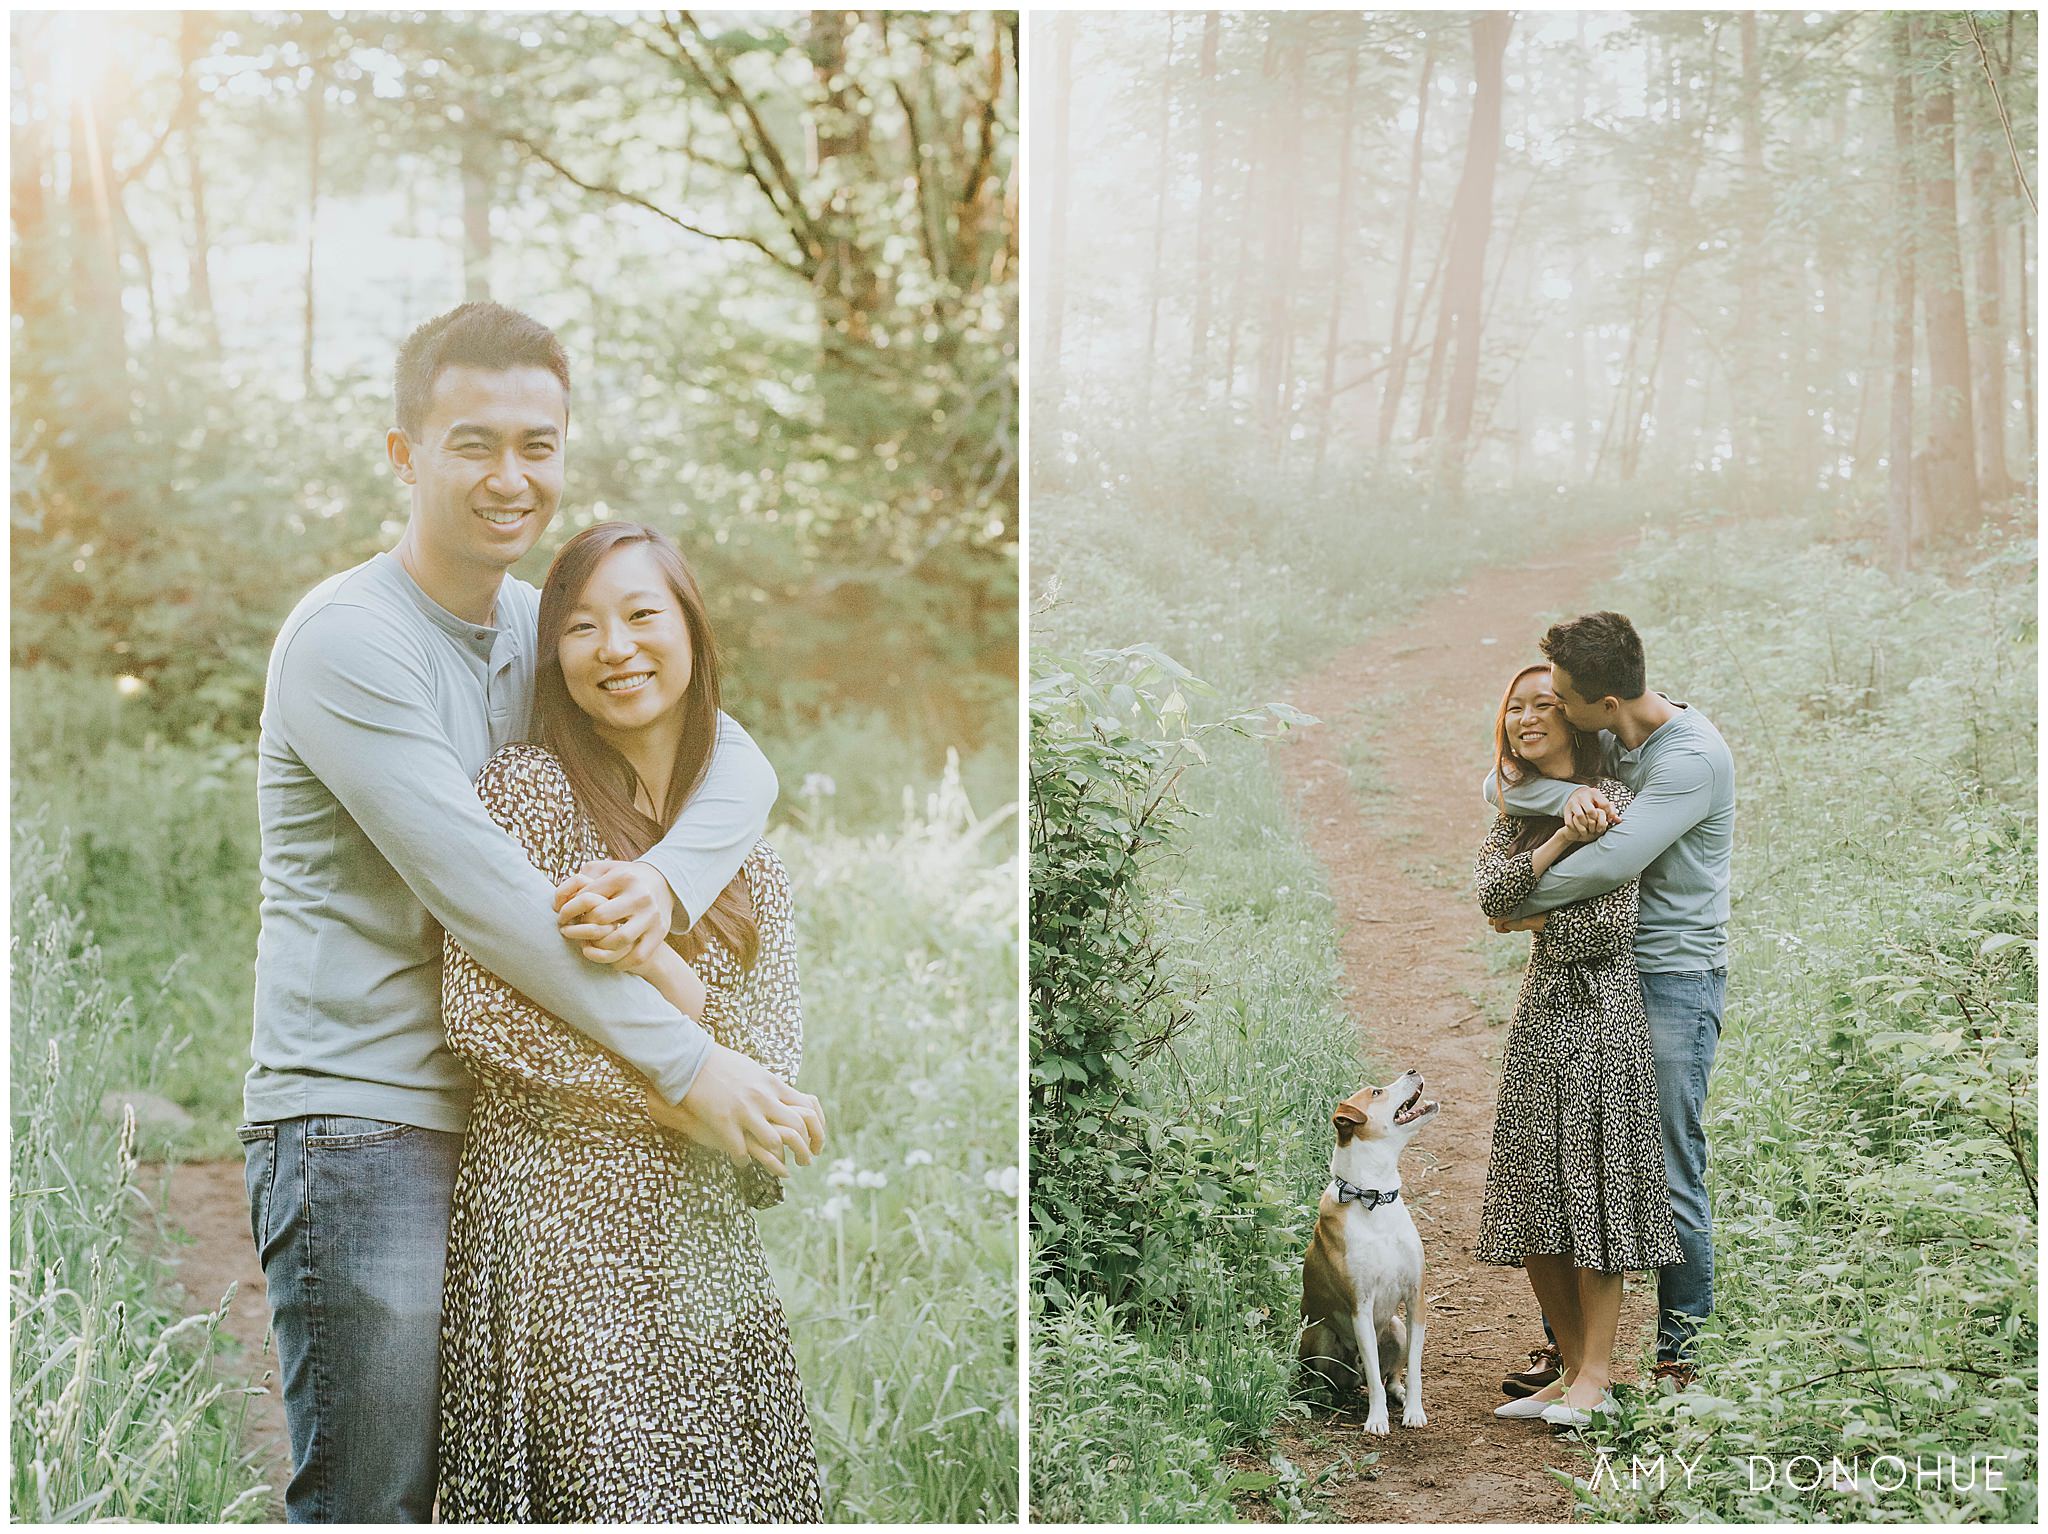 Light filled engagement session in Woodstock Vermont
